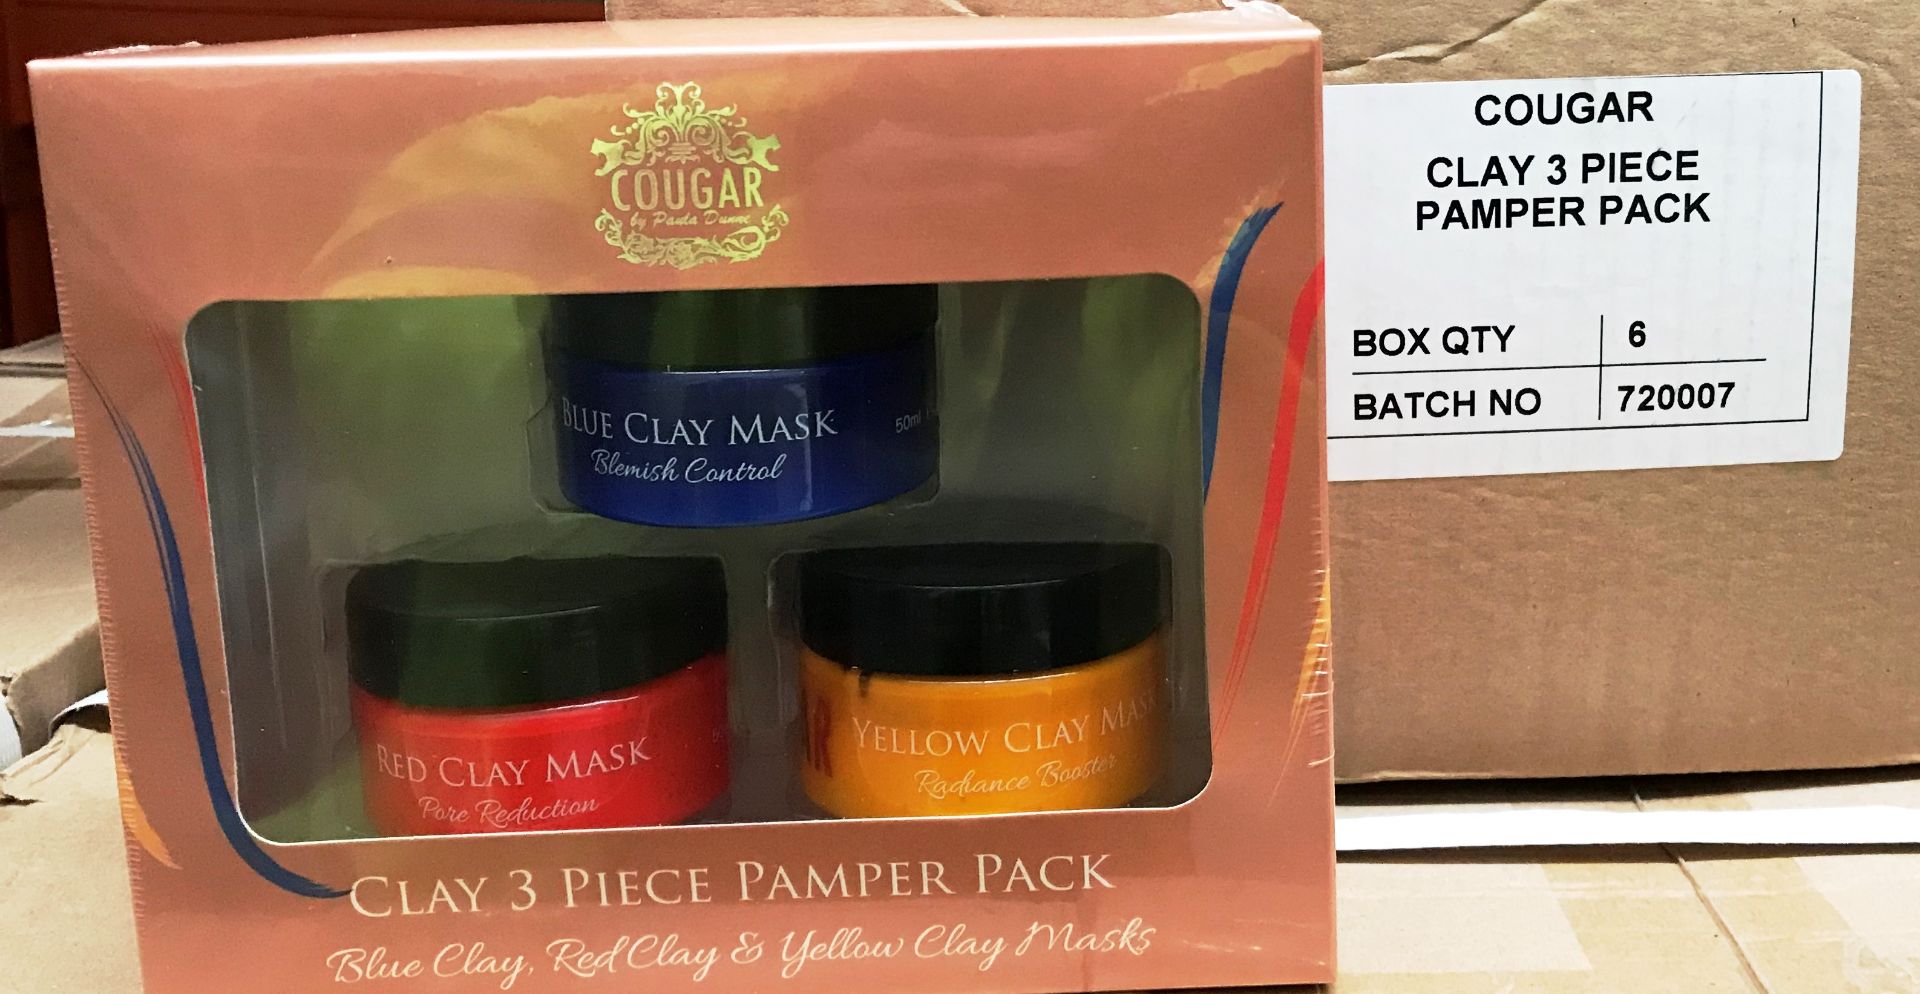 24 x Cougar clay 3 piece pamper pack sets (4 boxes)